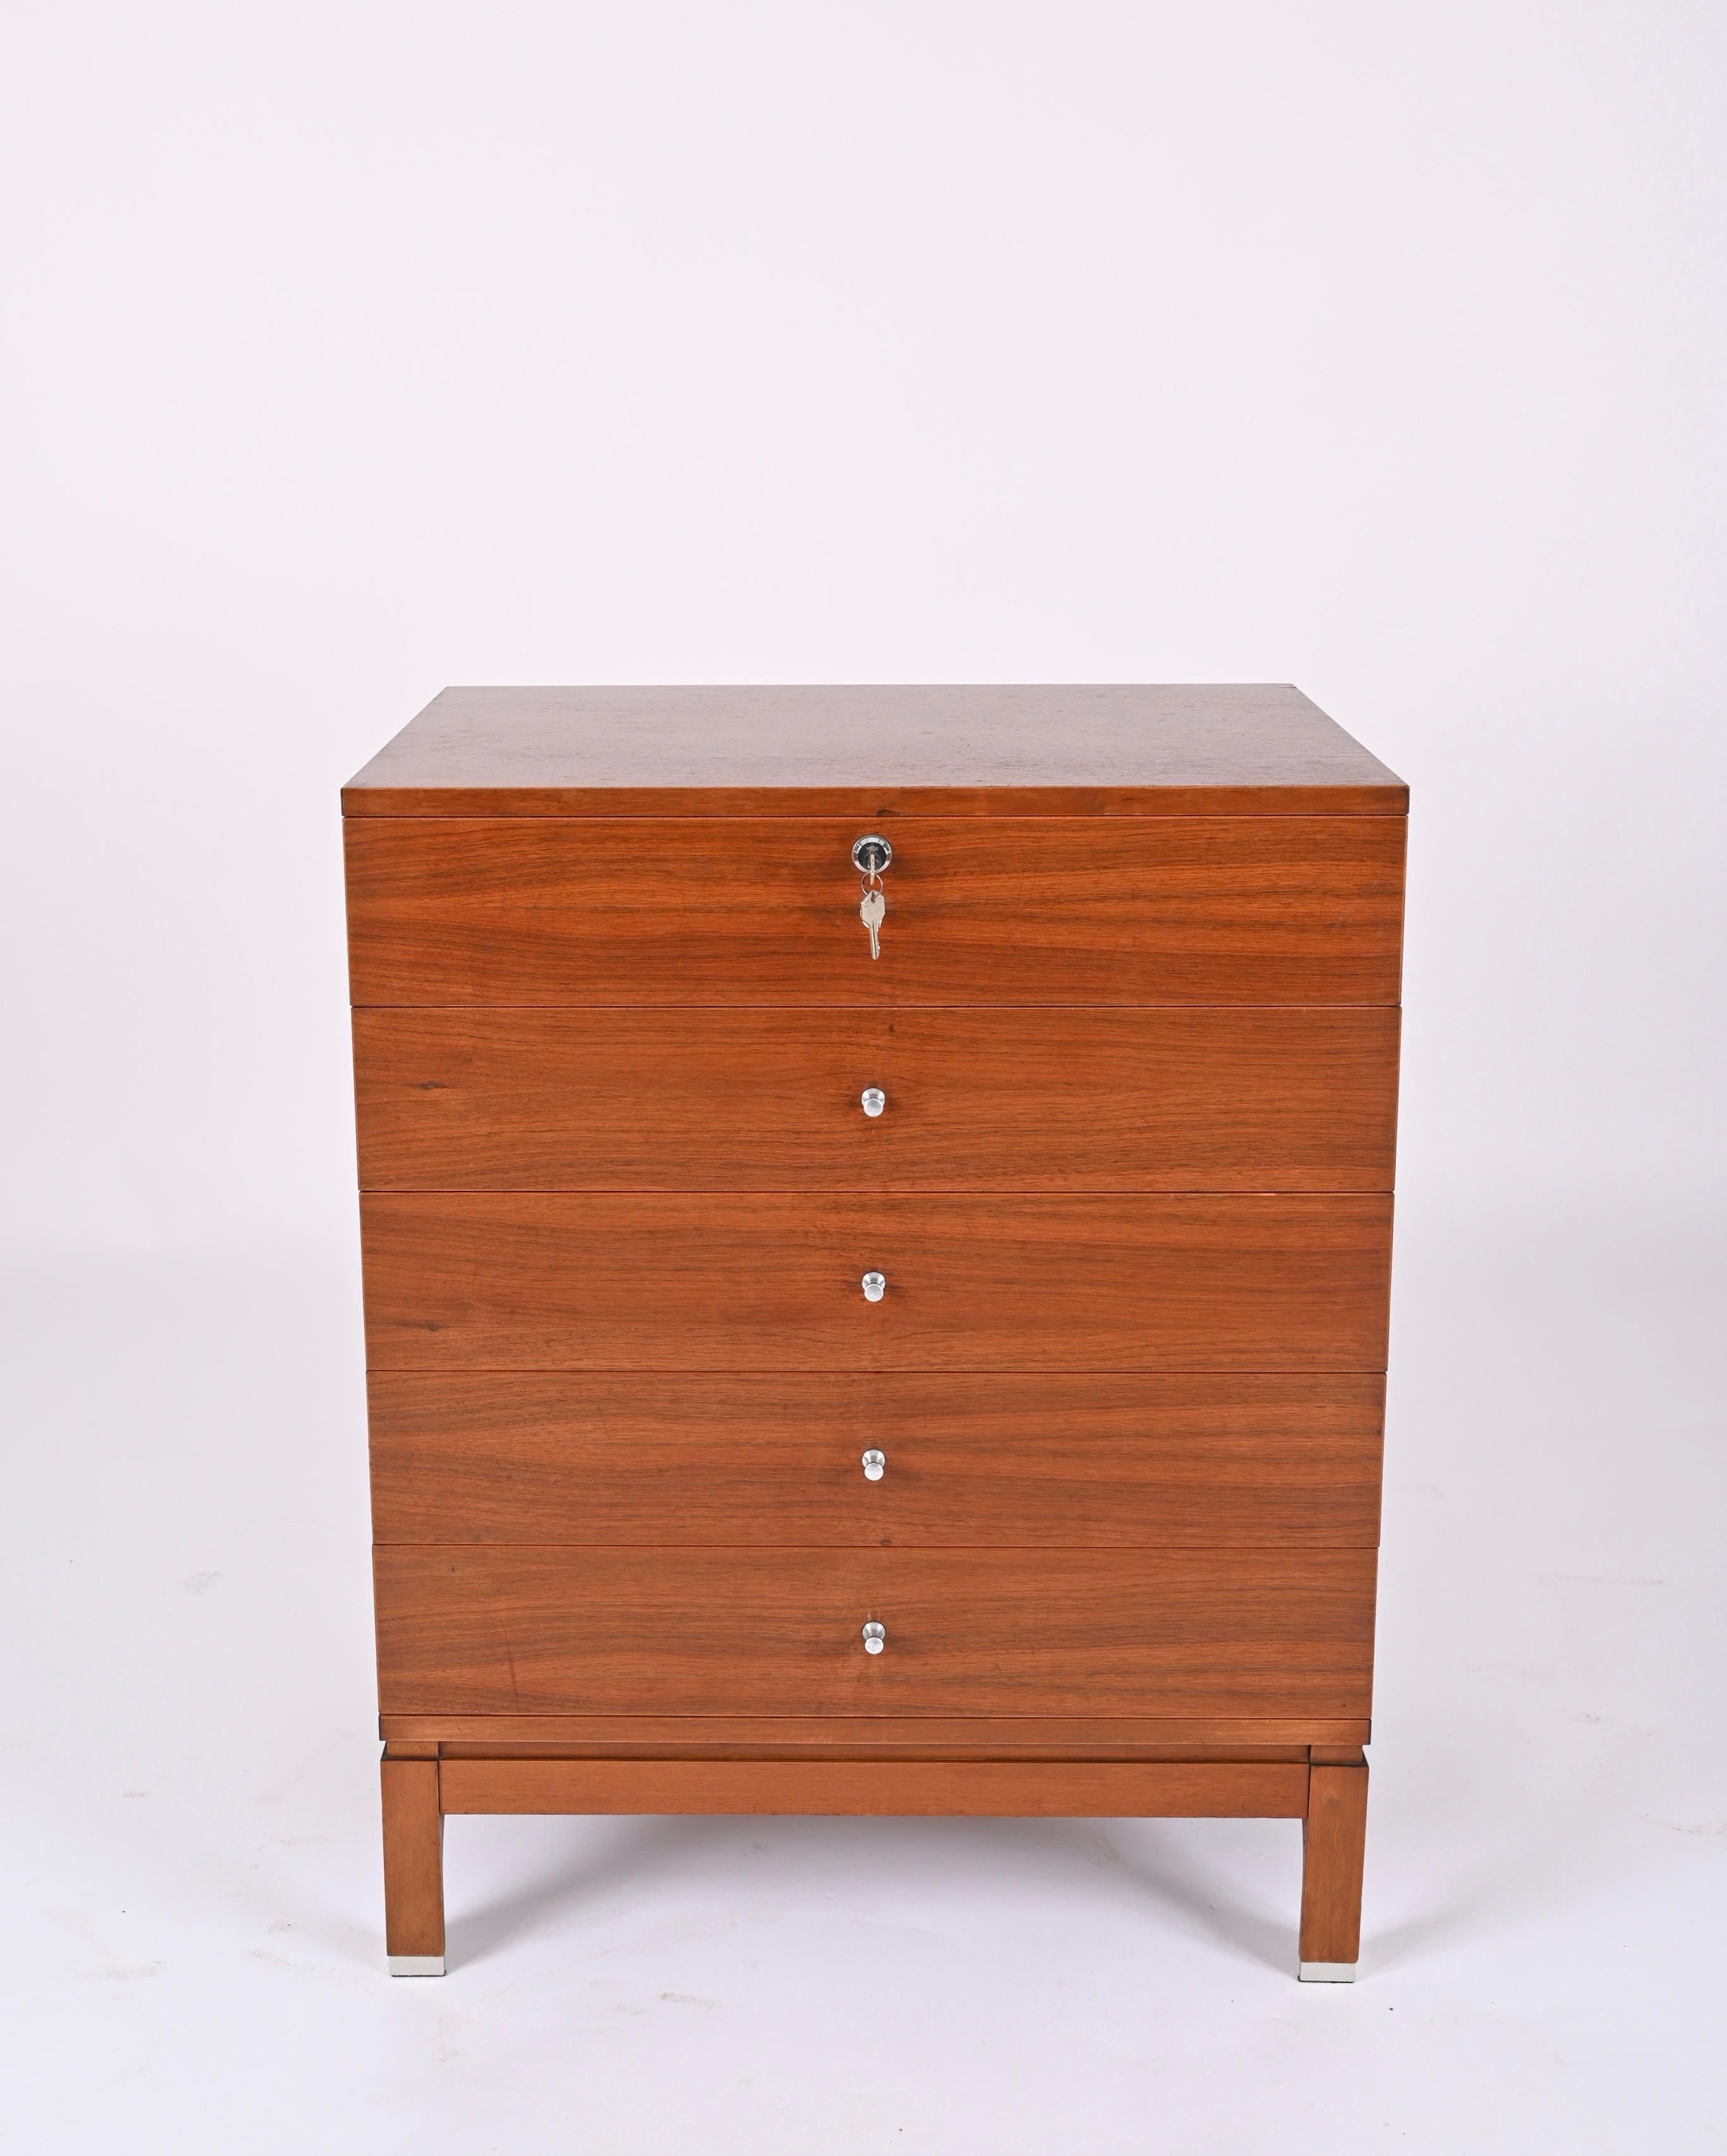 Wonderful midcentury five-drawers dresser. This minimal chest of drawers was designed by Ico Parisi and produced by Mim Roma. Made in walnut wood with wonderful wood grain and metal finishes that give contrast to the whole piece. The legs have an